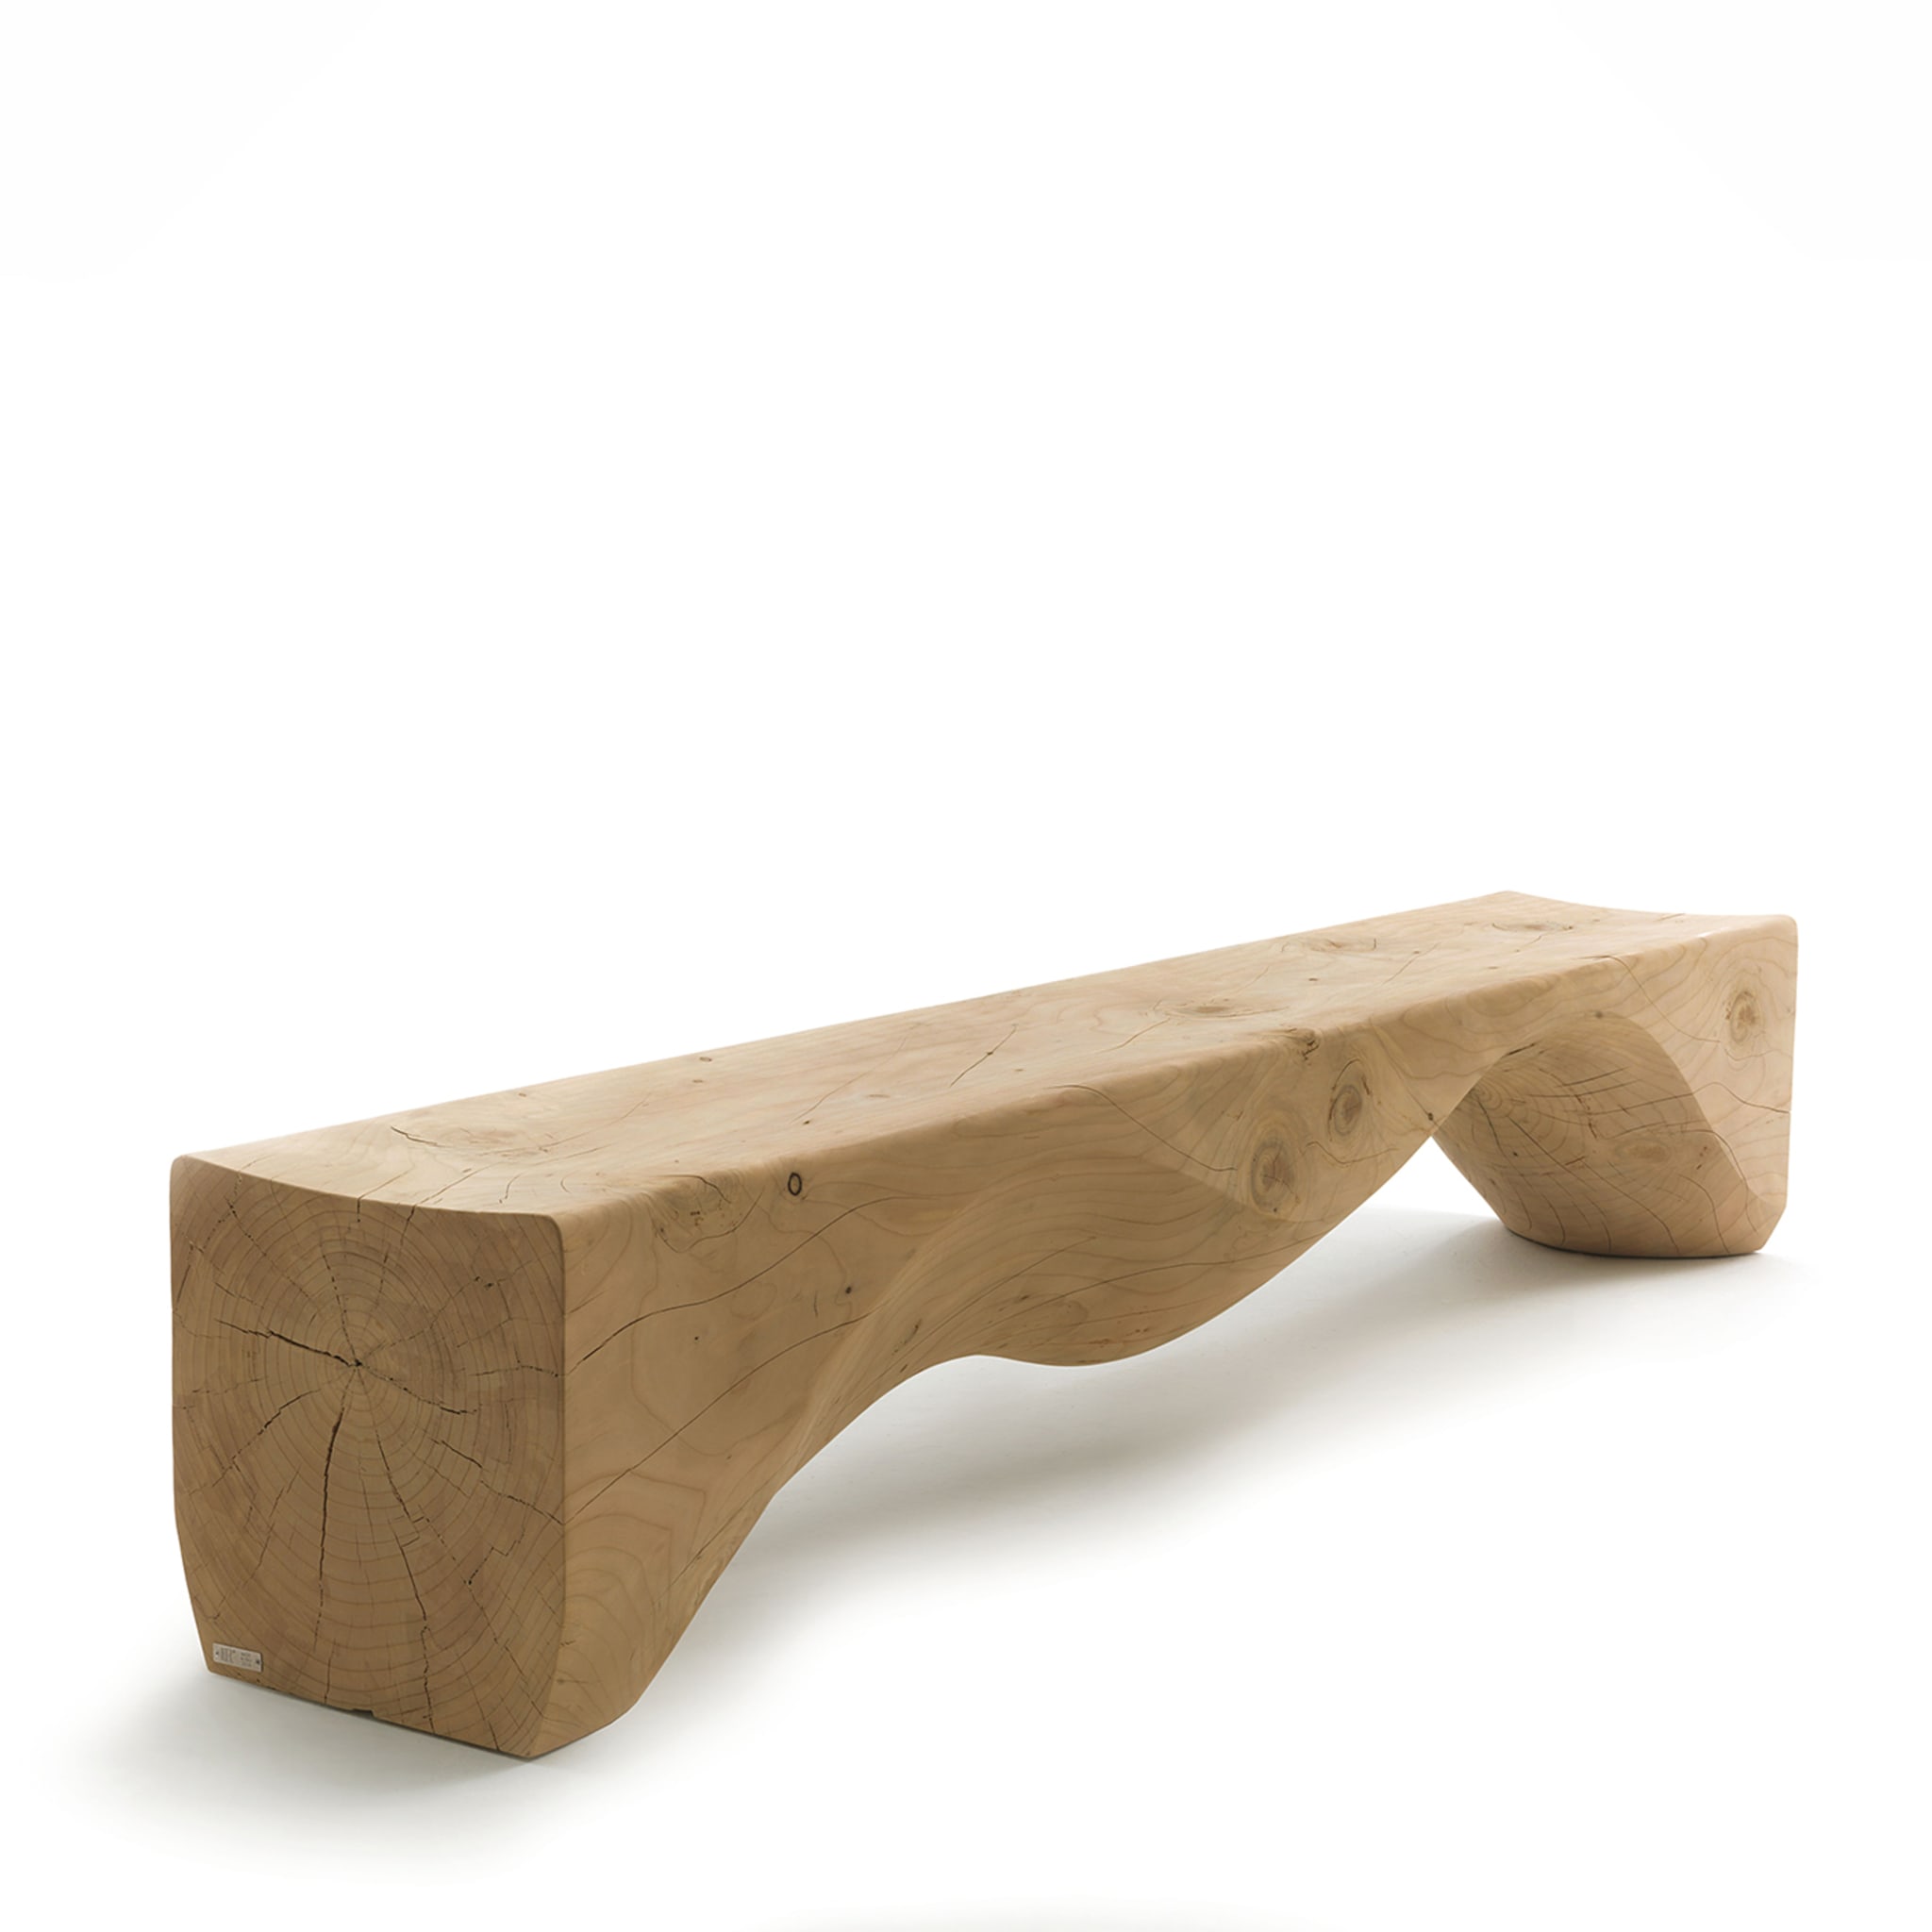 Mountains Bench by Hsiao-Ching Wang - Alternative view 1